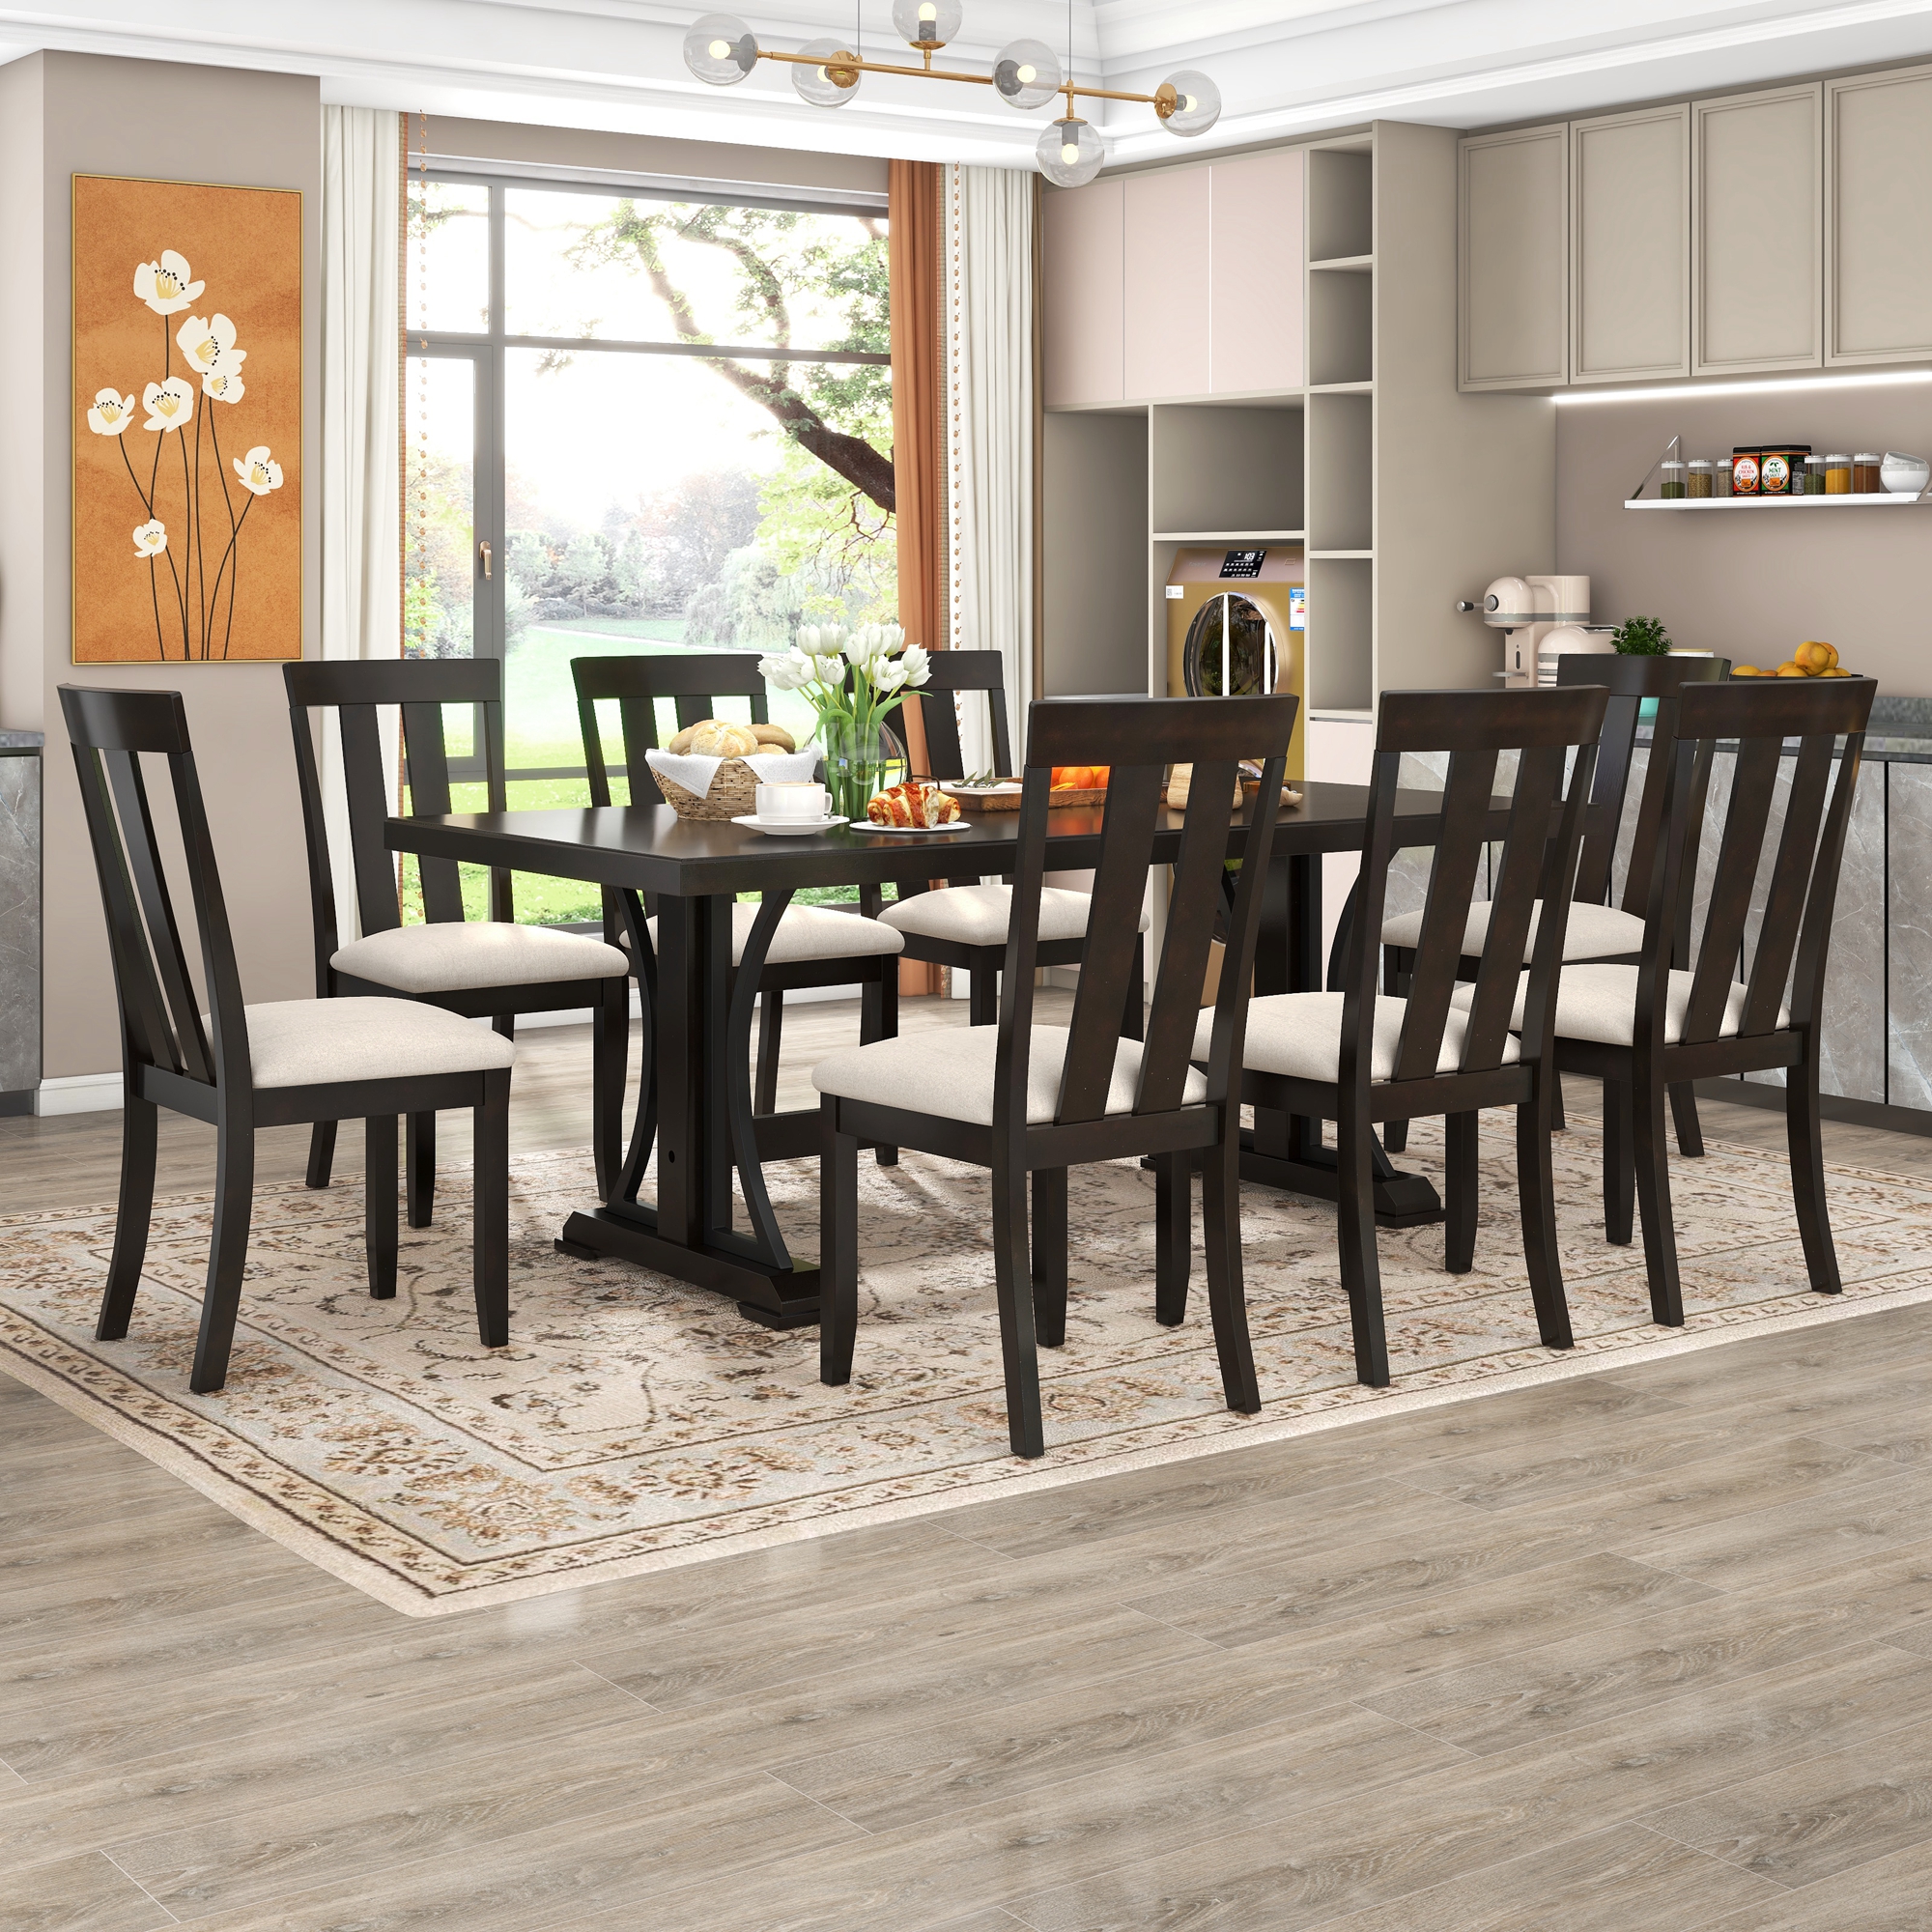 TREXM 9-Piece Retro Style Dining Table Set - ST000720AAP